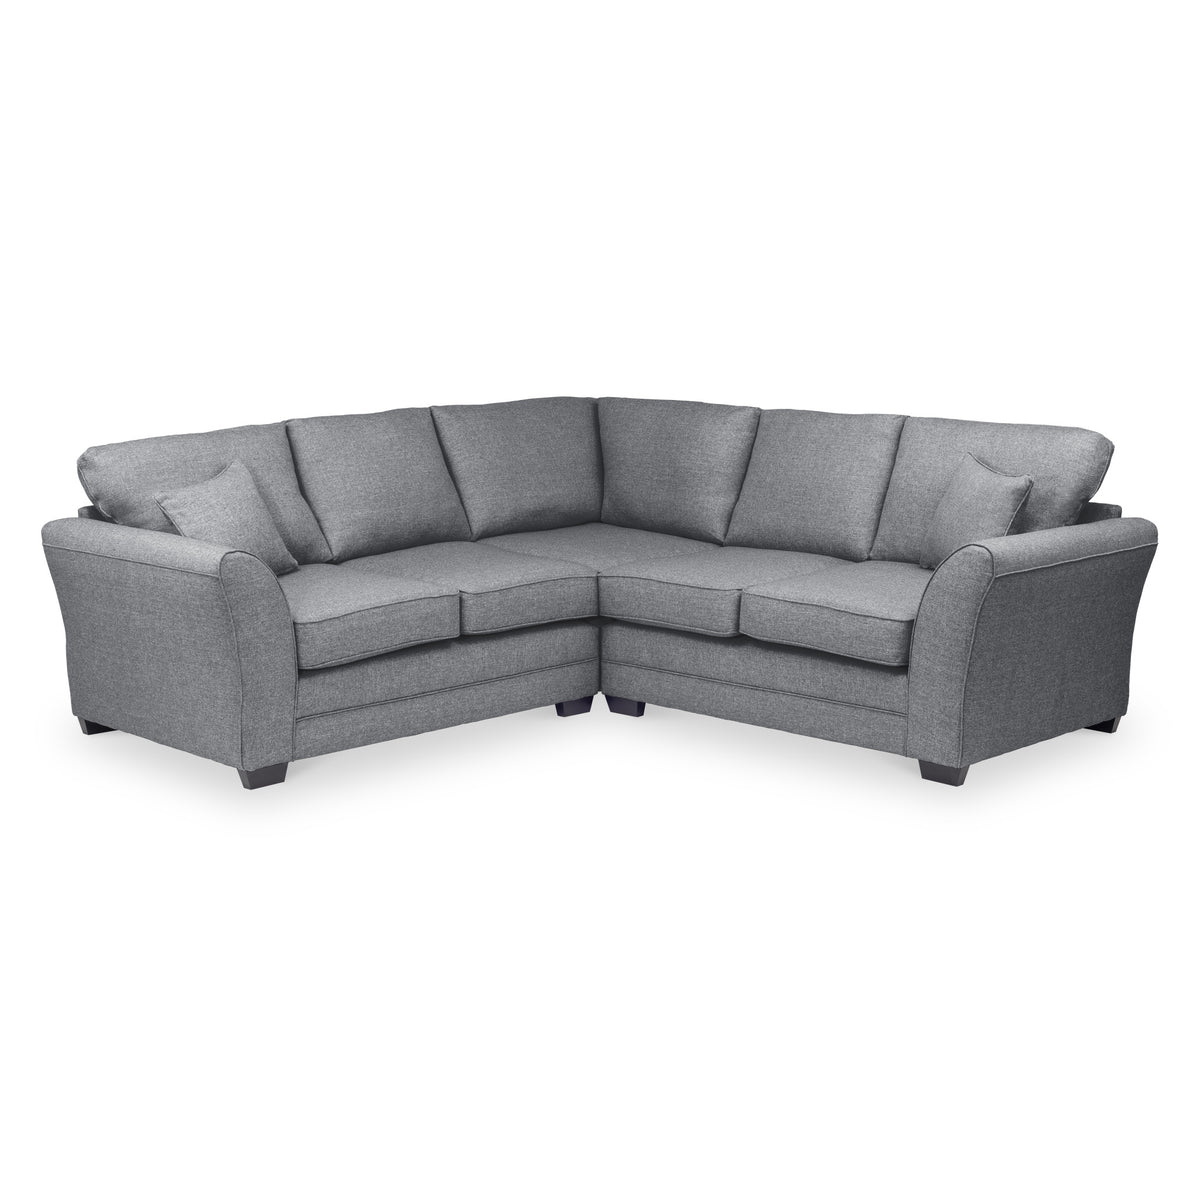 St Ives Large Corner Sofa in Charcoal by Roseland Furniture